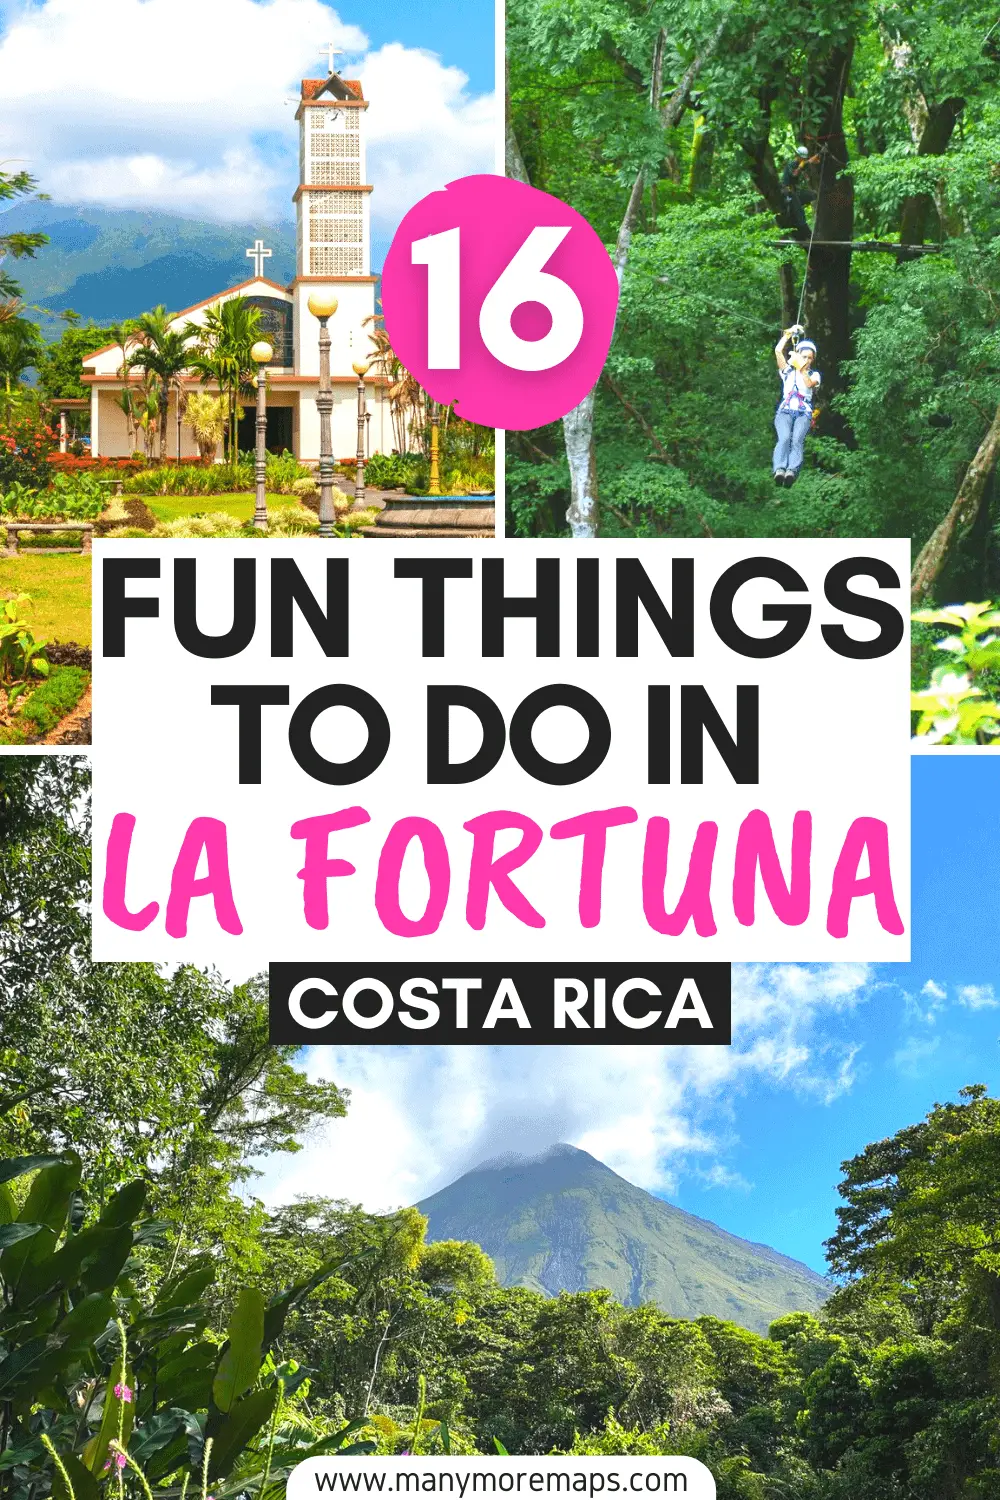 La Fortuna, the base for the Arenal Volcano, is one of the best places to visit in Costa Rica, and there are plenty of amazing things to do in the town! From hot springs and ziplines to canopy tours, hanging bridges and hiking a volcano, here are the best activities to do during your La Fortuna and Arenal travel itinerary!